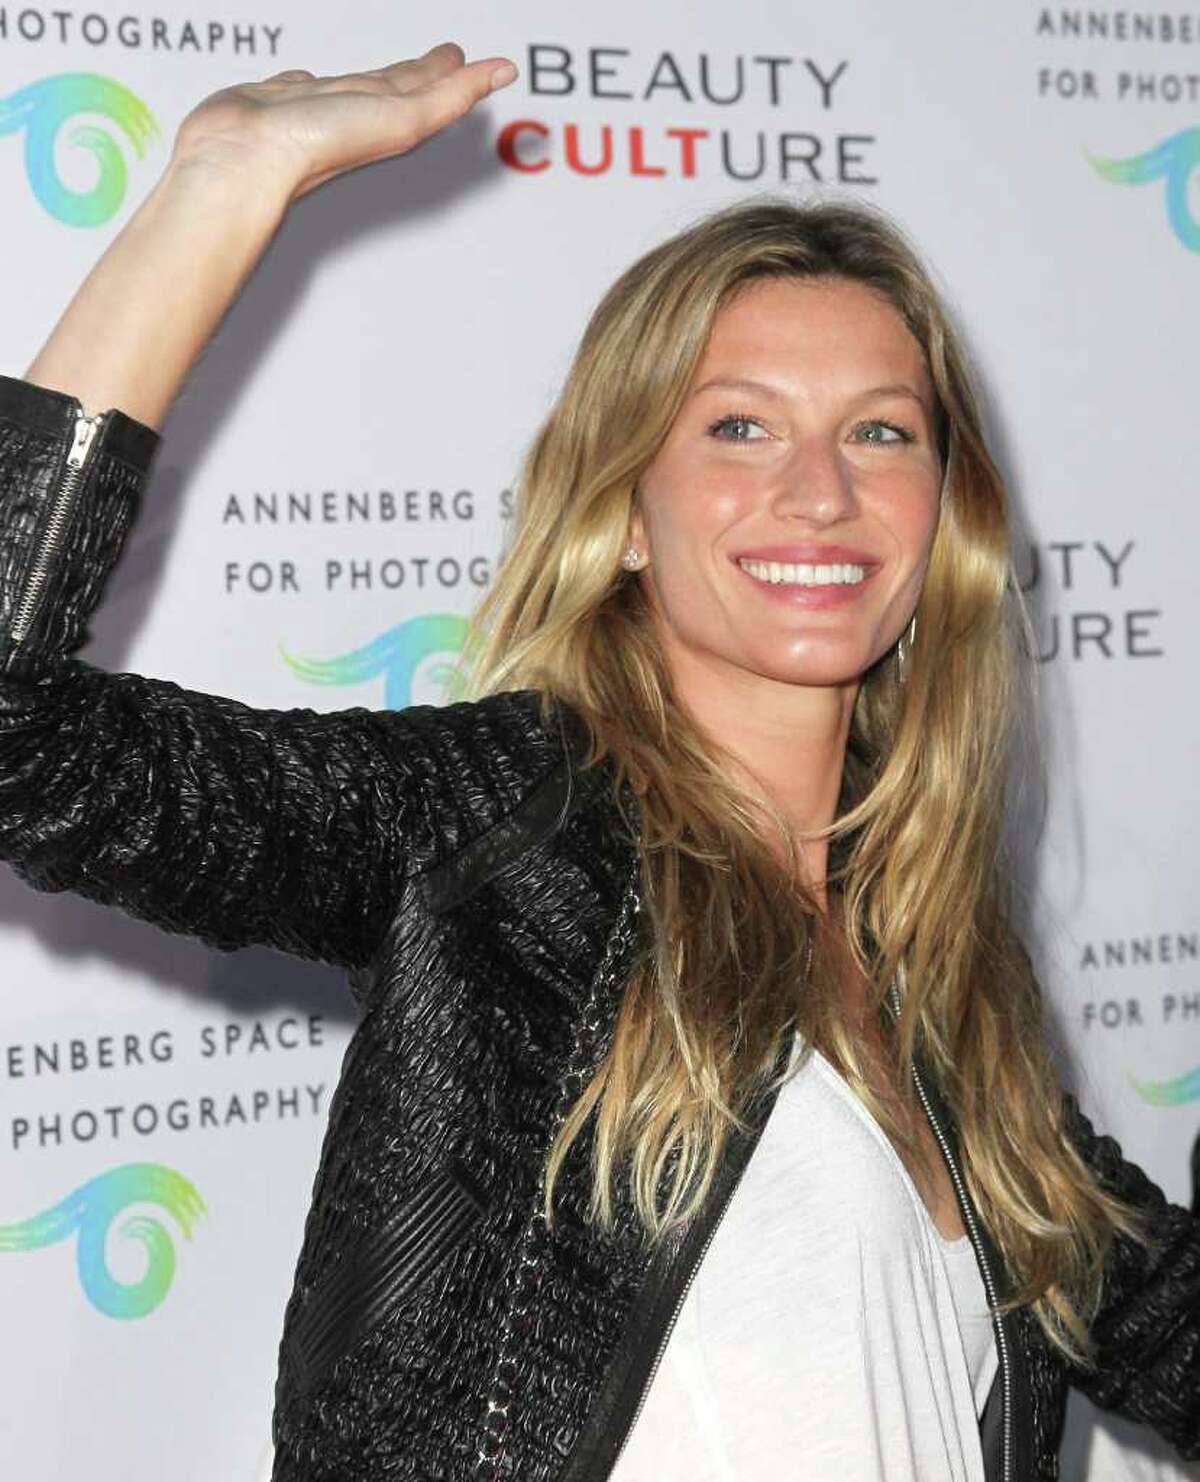 Model Gisele Bundchen attends the Opening Night of "Beauty Culture" at The Annenberg Space For Photography in Century City, California.